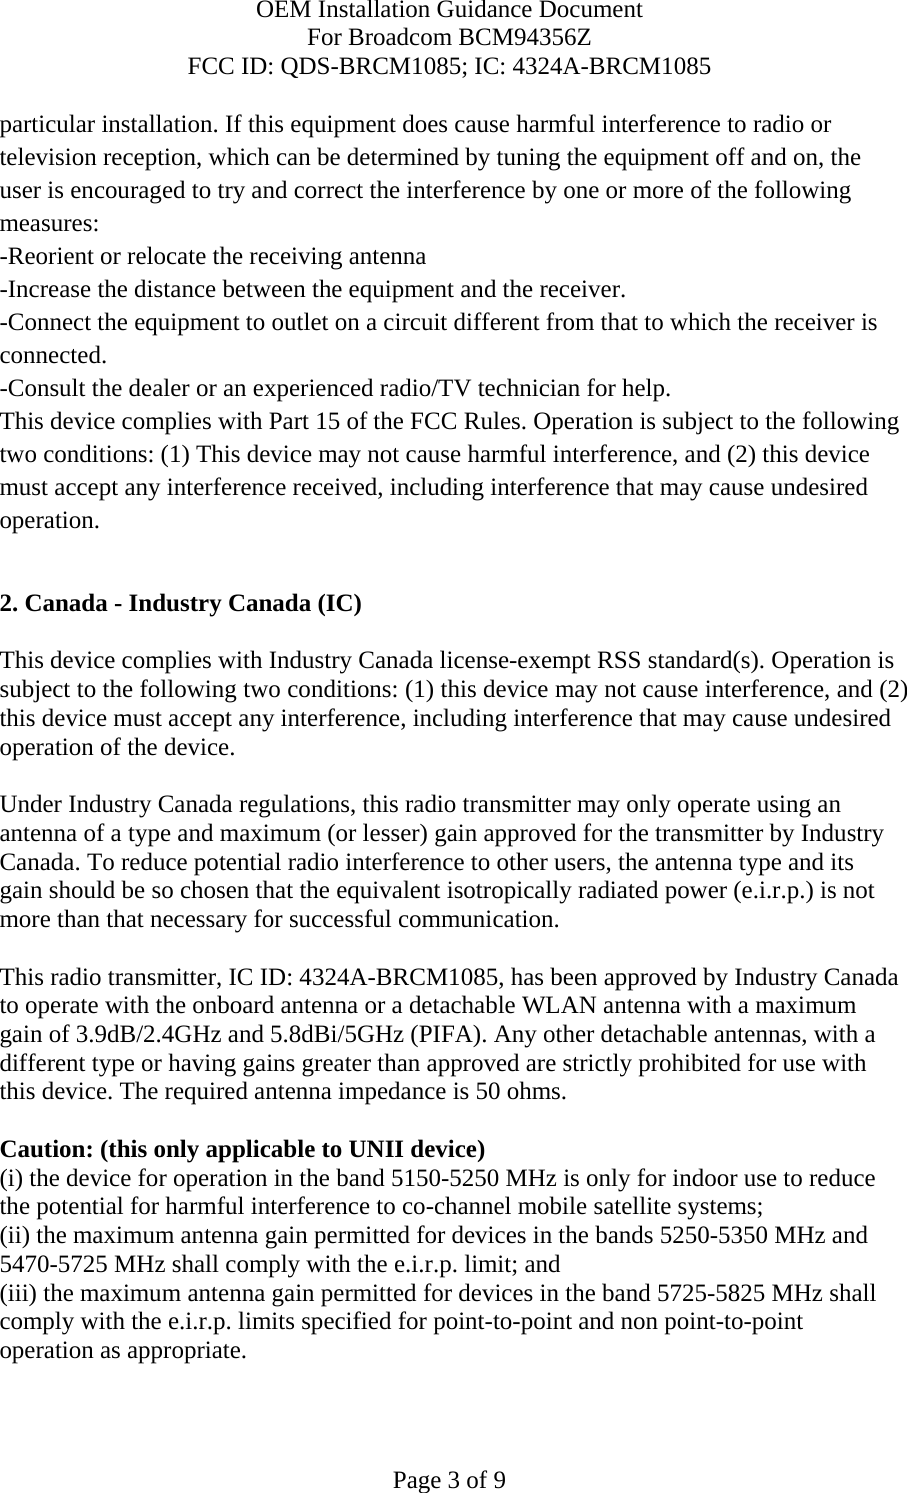 OEM Installation Guidance Document For Broadcom BCM94356Z FCC ID: QDS-BRCM1085; IC: 4324A-BRCM1085  Page 3 of 9 particular installation. If this equipment does cause harmful interference to radio or television reception, which can be determined by tuning the equipment off and on, the user is encouraged to try and correct the interference by one or more of the following measures: -Reorient or relocate the receiving antenna -Increase the distance between the equipment and the receiver. -Connect the equipment to outlet on a circuit different from that to which the receiver is connected. -Consult the dealer or an experienced radio/TV technician for help. This device complies with Part 15 of the FCC Rules. Operation is subject to the following two conditions: (1) This device may not cause harmful interference, and (2) this device must accept any interference received, including interference that may cause undesired operation.  2. Canada - Industry Canada (IC)  This device complies with Industry Canada license-exempt RSS standard(s). Operation is subject to the following two conditions: (1) this device may not cause interference, and (2) this device must accept any interference, including interference that may cause undesired operation of the device.  Under Industry Canada regulations, this radio transmitter may only operate using an antenna of a type and maximum (or lesser) gain approved for the transmitter by Industry Canada. To reduce potential radio interference to other users, the antenna type and its gain should be so chosen that the equivalent isotropically radiated power (e.i.r.p.) is not more than that necessary for successful communication.  This radio transmitter, IC ID: 4324A-BRCM1085, has been approved by Industry Canada to operate with the onboard antenna or a detachable WLAN antenna with a maximum gain of 3.9dB/2.4GHz and 5.8dBi/5GHz (PIFA). Any other detachable antennas, with a different type or having gains greater than approved are strictly prohibited for use with this device. The required antenna impedance is 50 ohms.  Caution: (this only applicable to UNII device) (i) the device for operation in the band 5150-5250 MHz is only for indoor use to reduce the potential for harmful interference to co-channel mobile satellite systems; (ii) the maximum antenna gain permitted for devices in the bands 5250-5350 MHz and 5470-5725 MHz shall comply with the e.i.r.p. limit; and (iii) the maximum antenna gain permitted for devices in the band 5725-5825 MHz shall comply with the e.i.r.p. limits specified for point-to-point and non point-to-point operation as appropriate. 